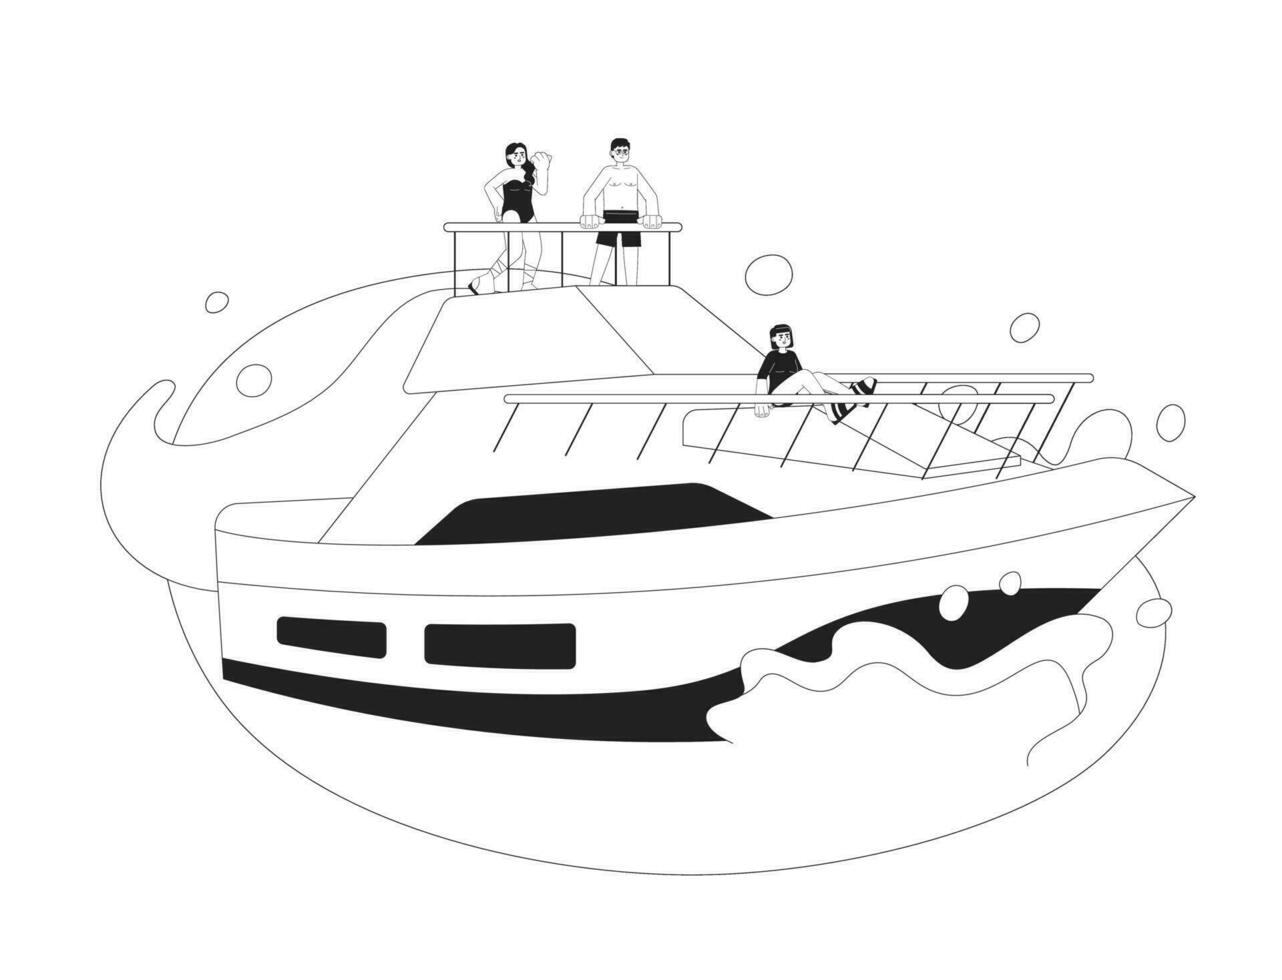 Yacht party monochrome vector spot illustration. Friends in swimwear luxury yachting 2D flat bw cartoon characters for web UI design. Summer. Sailboat in ocean isolated editable hand drawn hero image